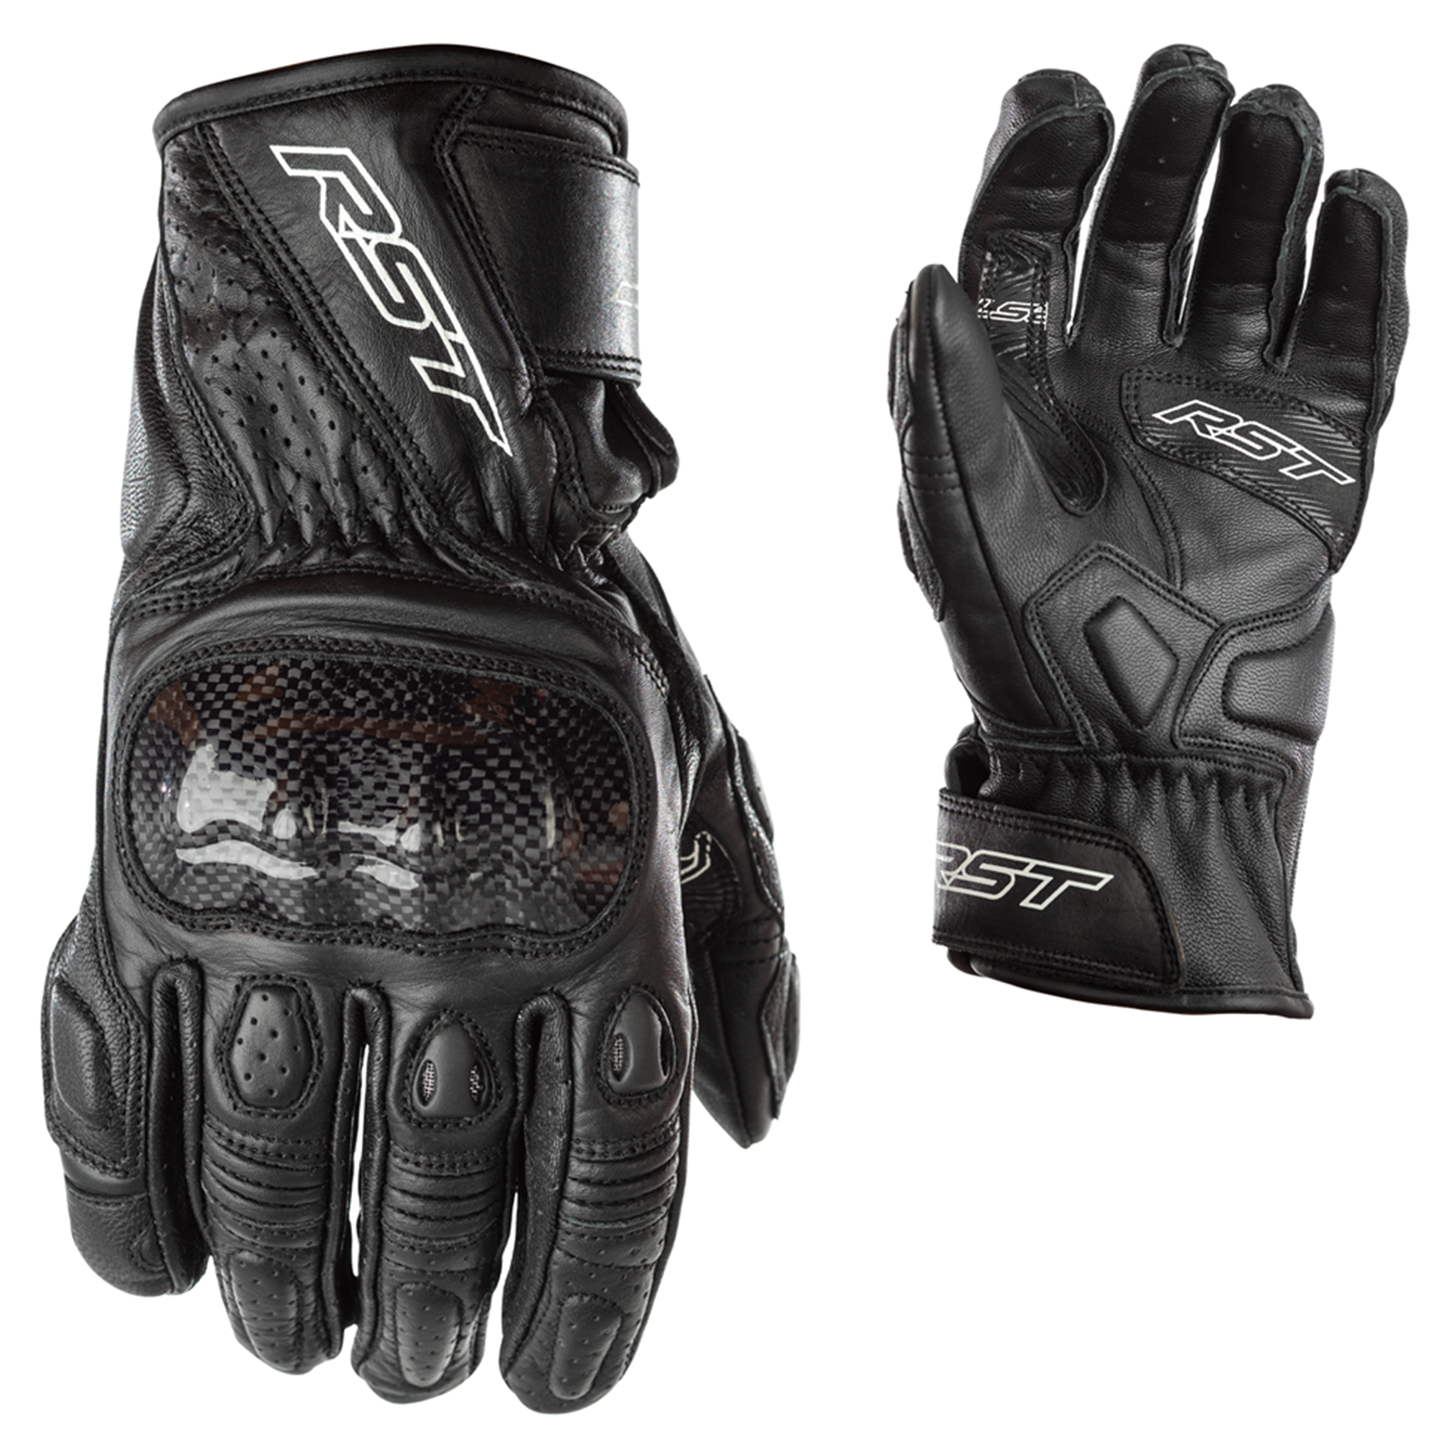 RST Stunt 3 III Ladies Leather Riding Gloves - CE Approved - Black